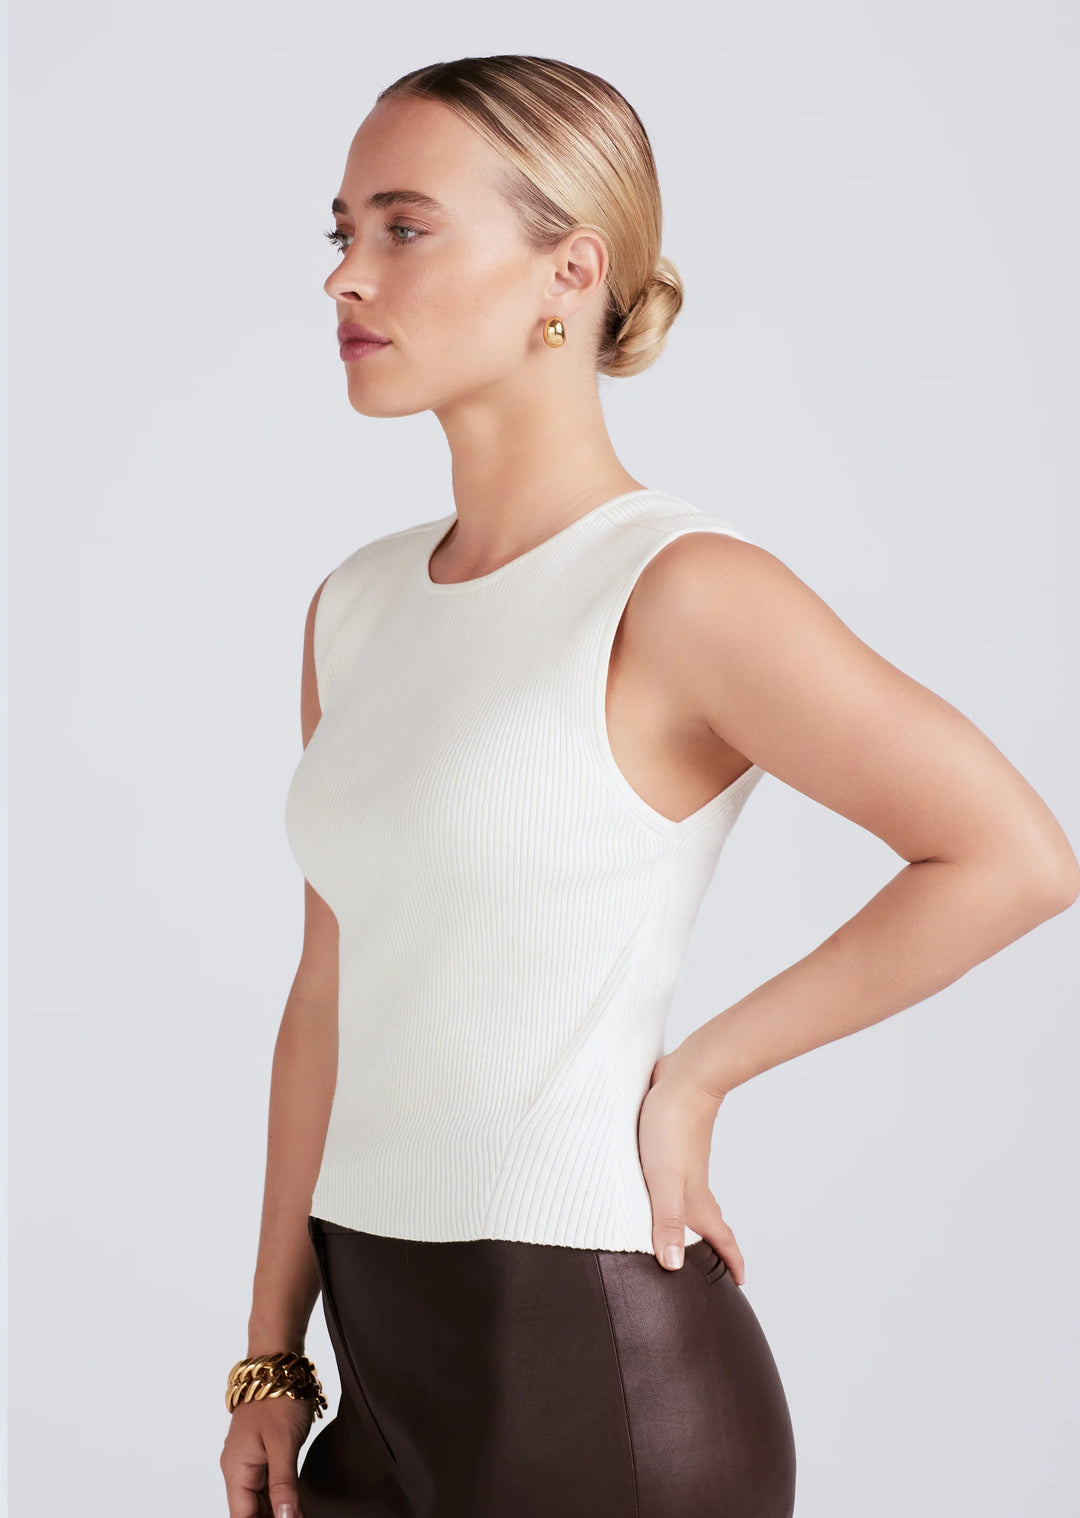 Derek Lam 10 Crosby - Ariana Muscle Ribbed Sweater Tank in Ivory